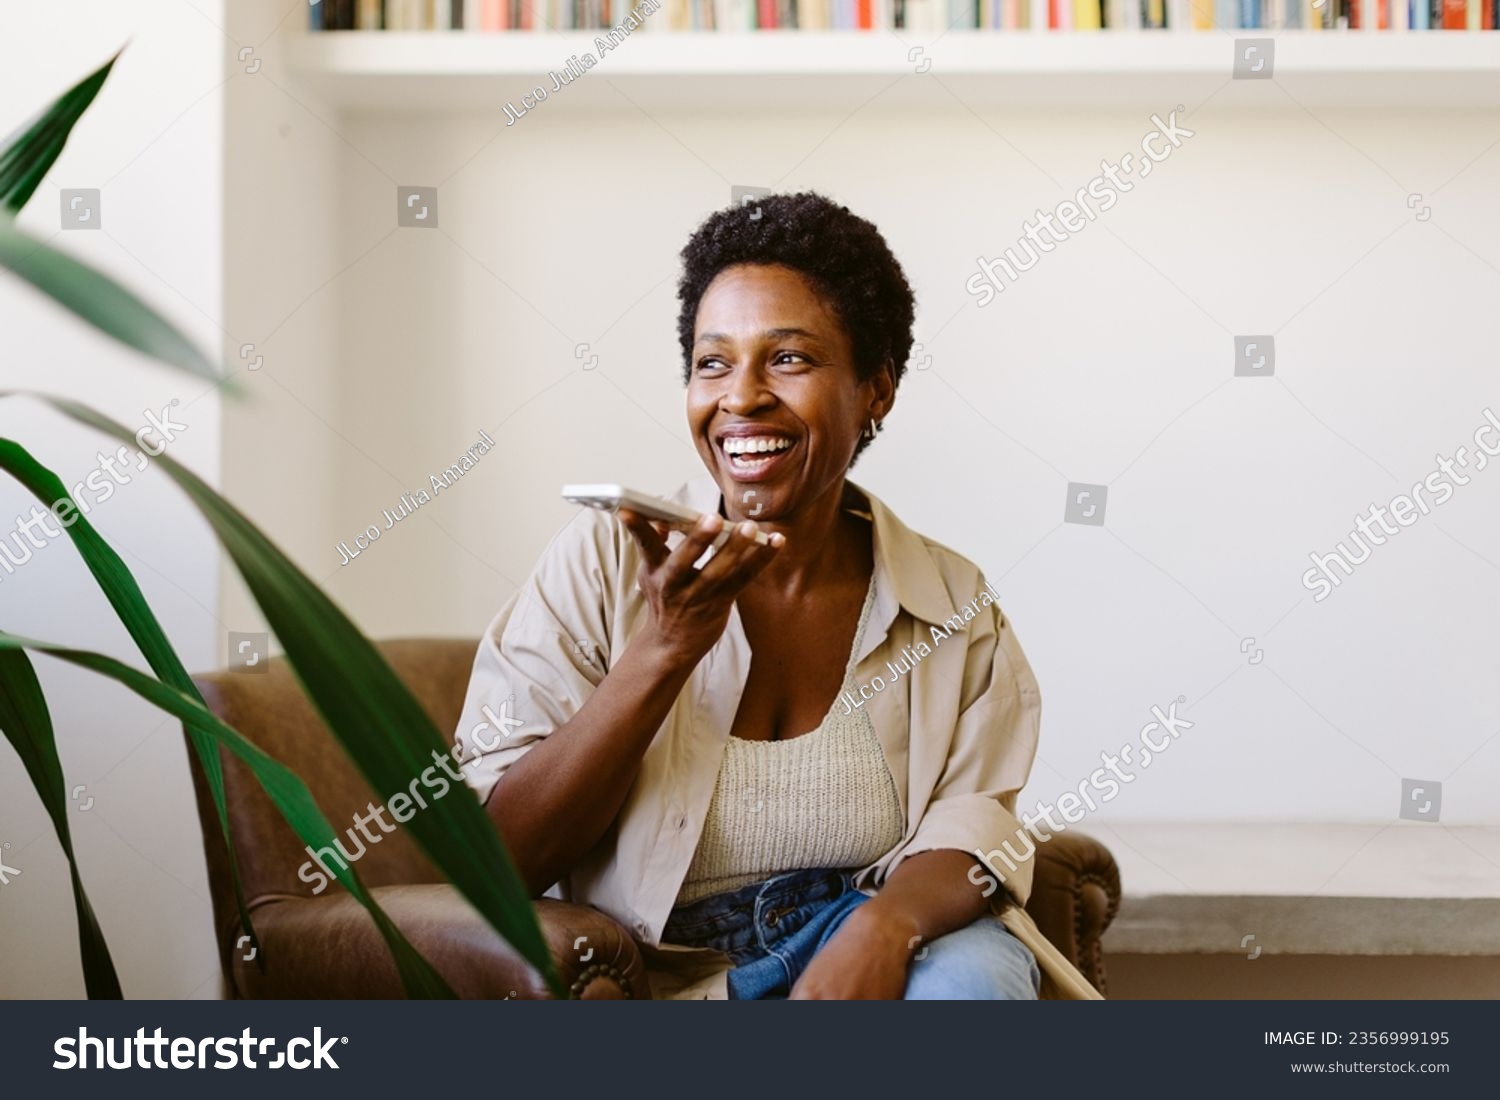 Happy Brazilian woman sits on a couch, speaking on her smartphone. Smiling and relaxed, she holds the phone and looks away, fully engaged in a phone call from her living room. #2356999195